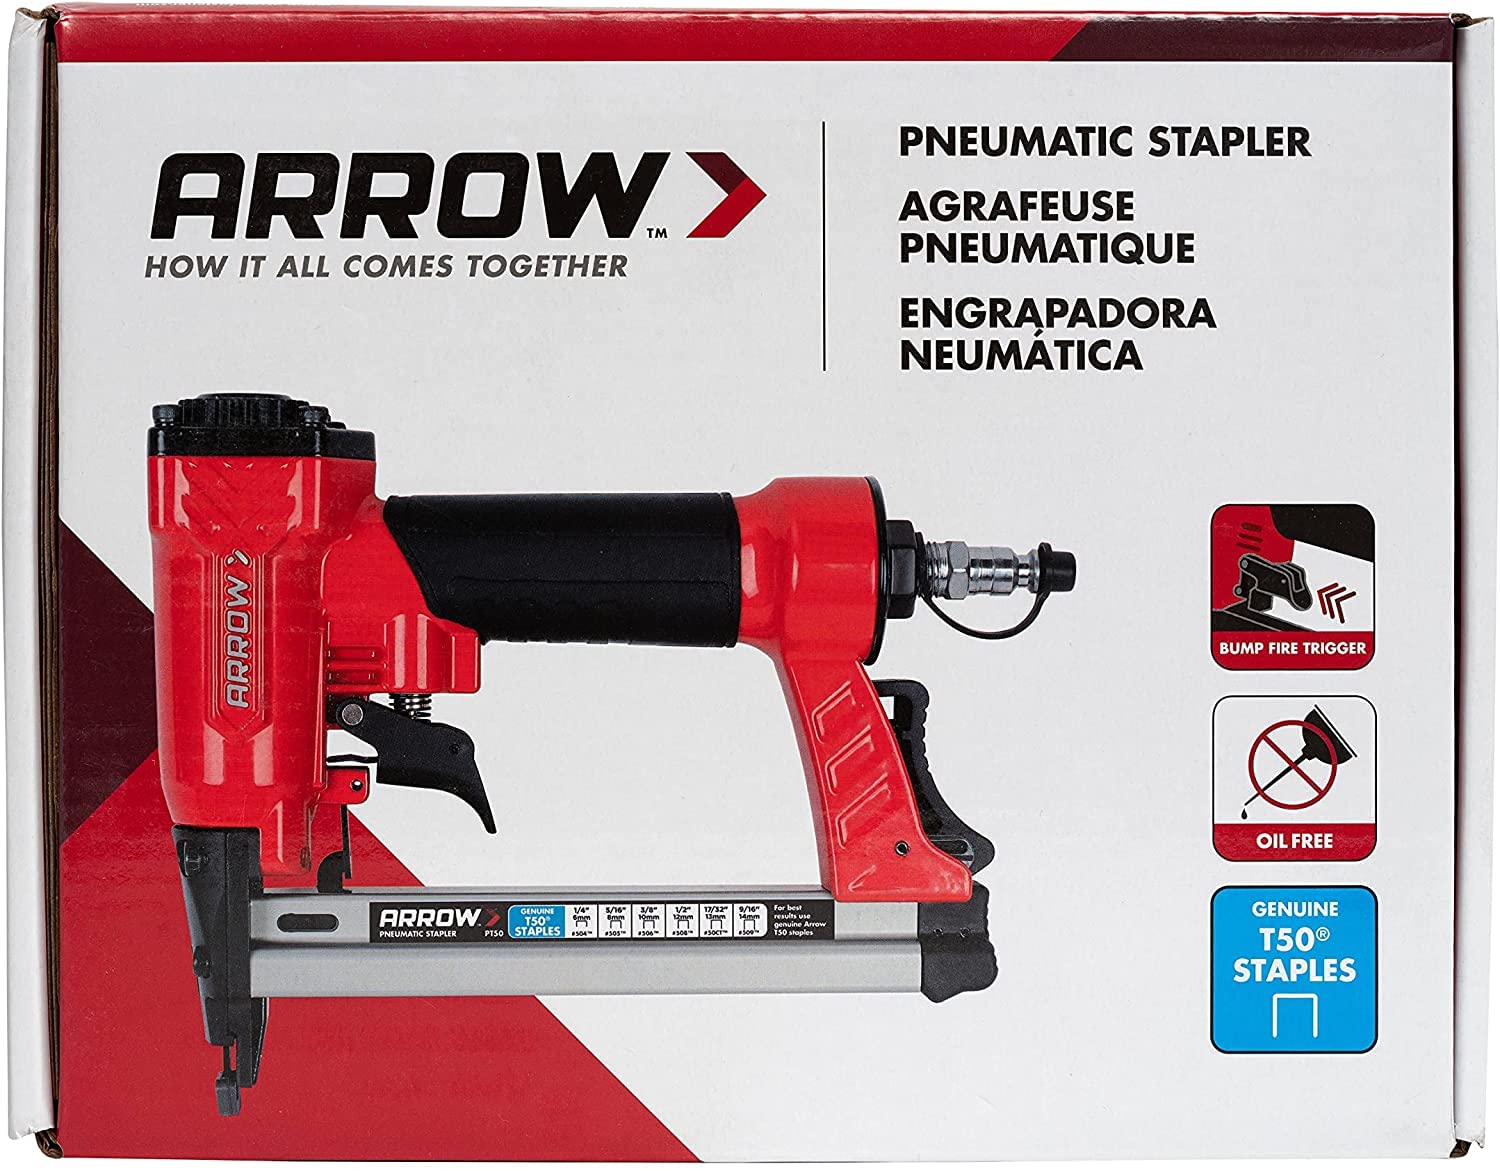 Arrow PT50 Oil-Free Pneumatic Staple Gun, Professional Heavy-Duty Stapler for Wood, Upholstery, Carpet, Wire Fencing, Fits 1/4”, 5/16”, 3/8